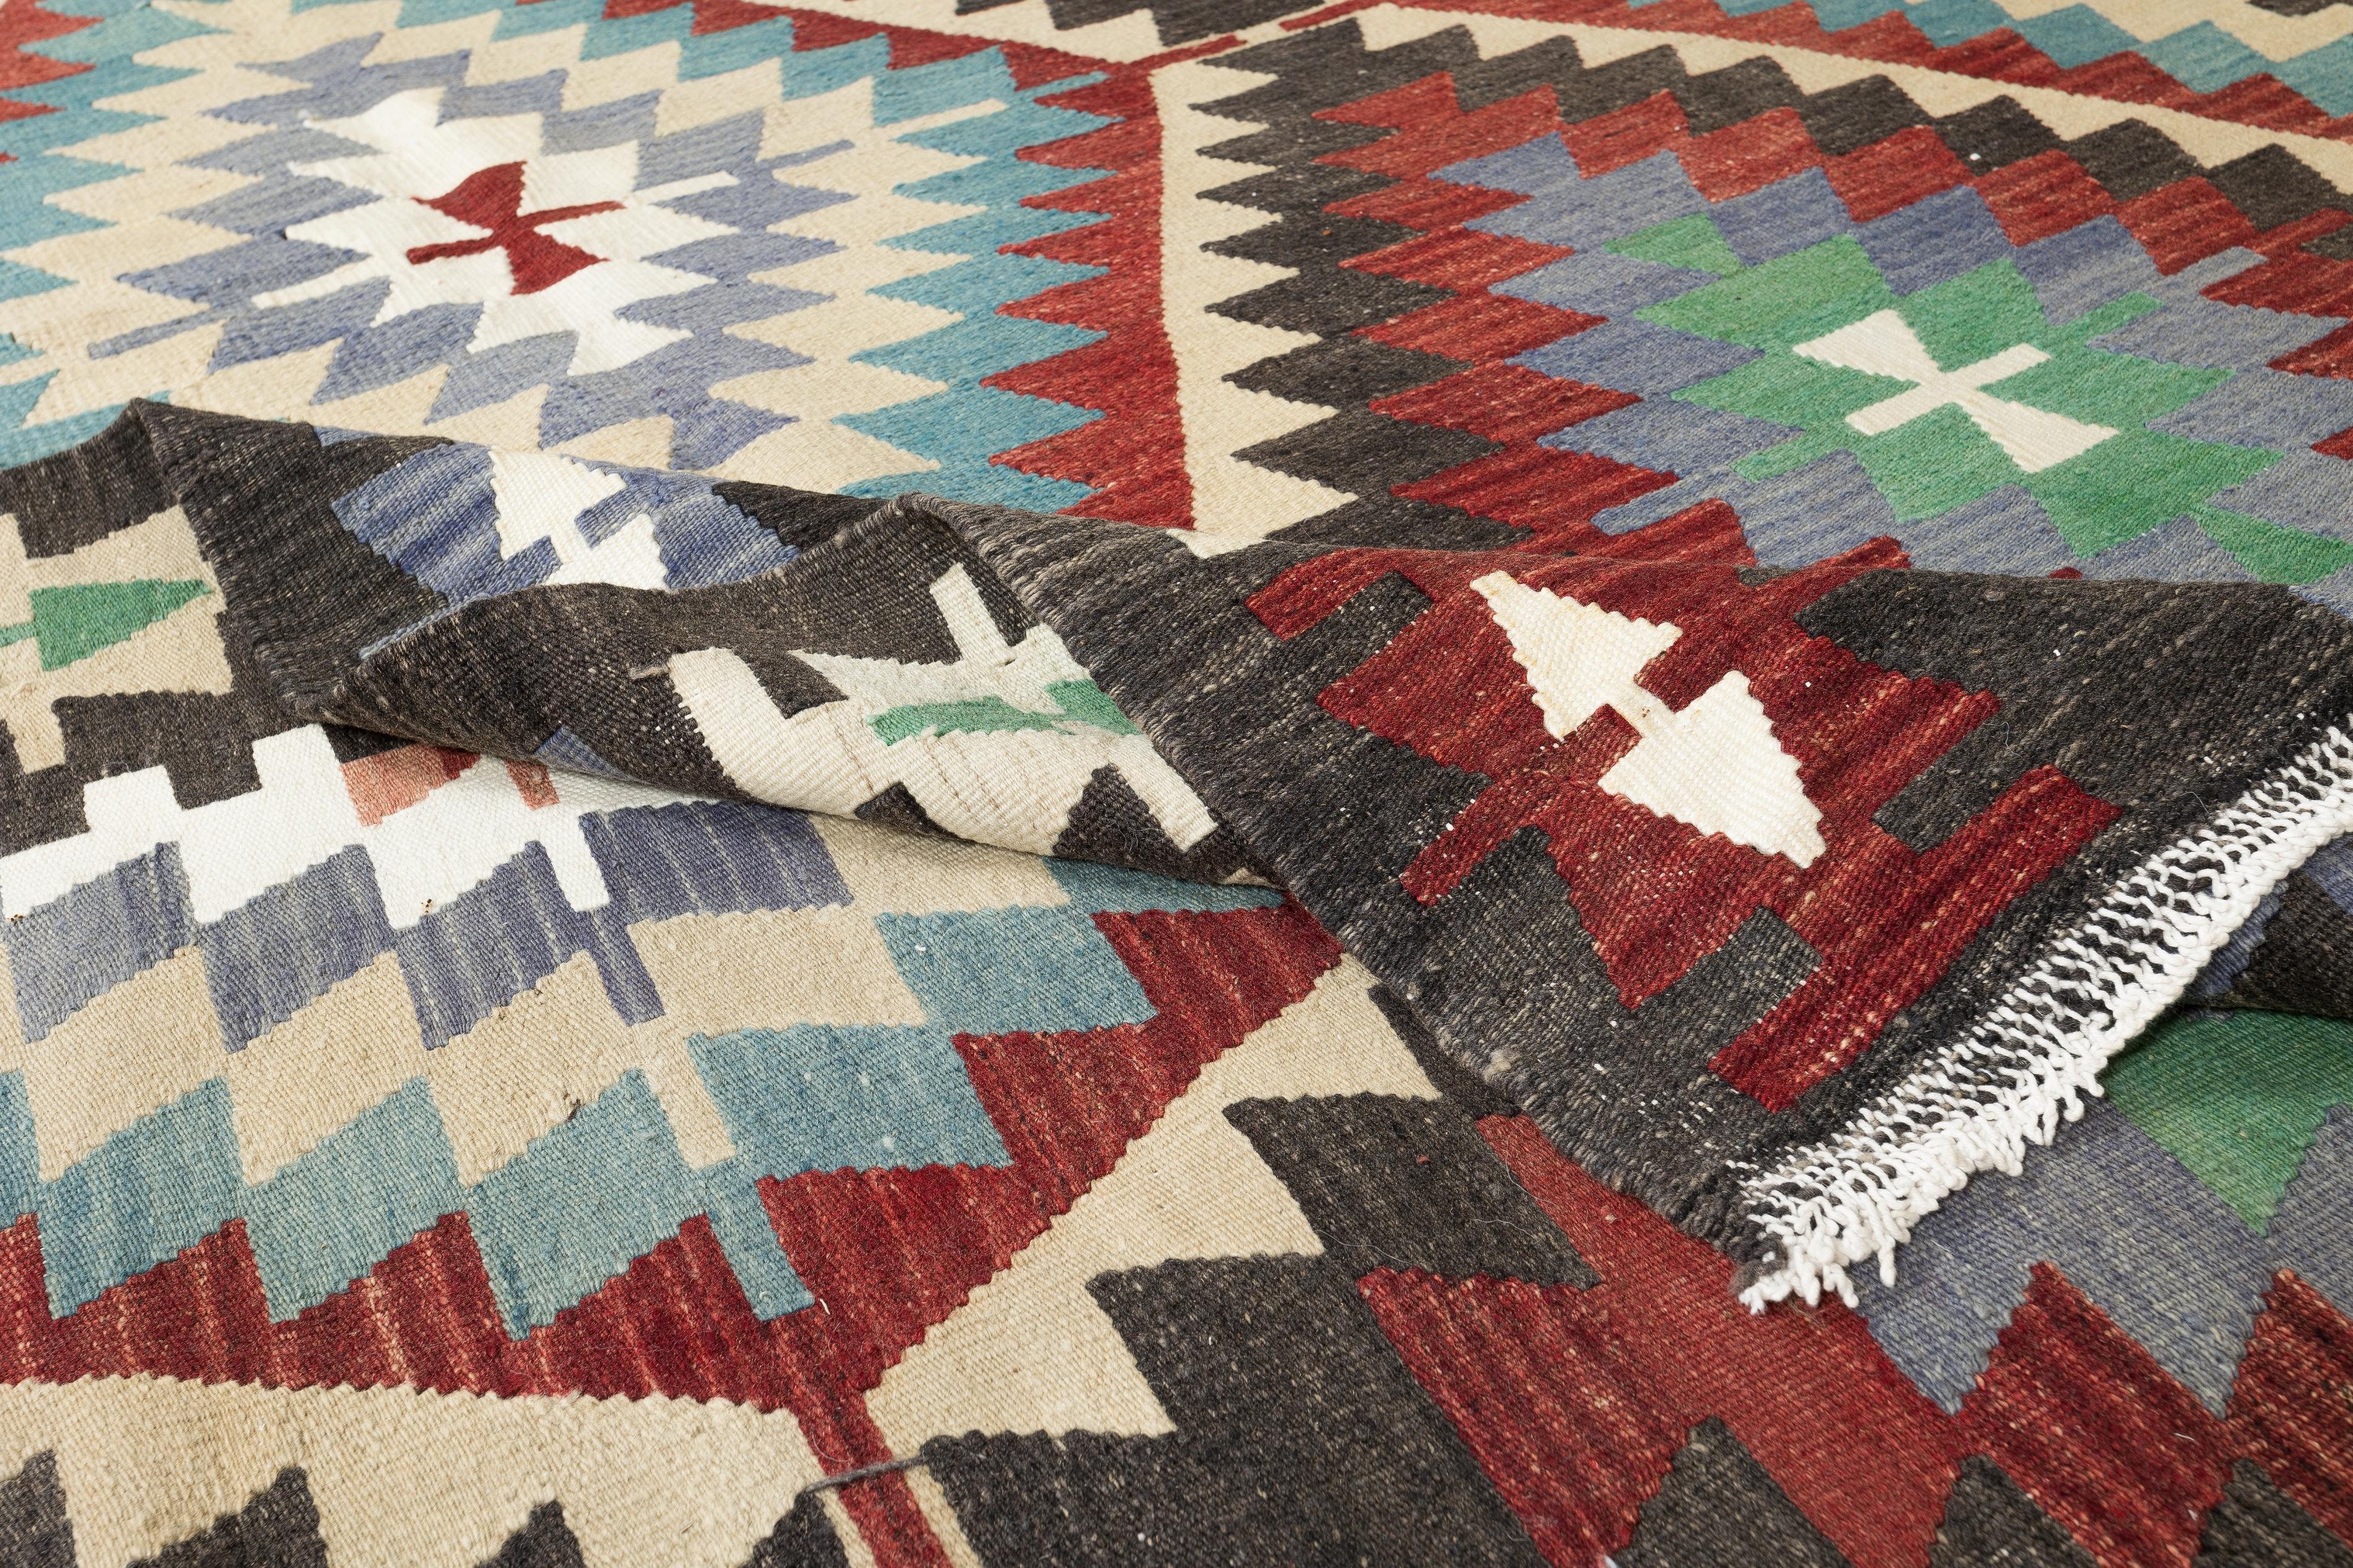 Hand-Woven 6.5x10.5 Ft Vintage HandWoven Turkish Kilim 'Flat-Weave'. Colorful Rug, All Wool For Sale